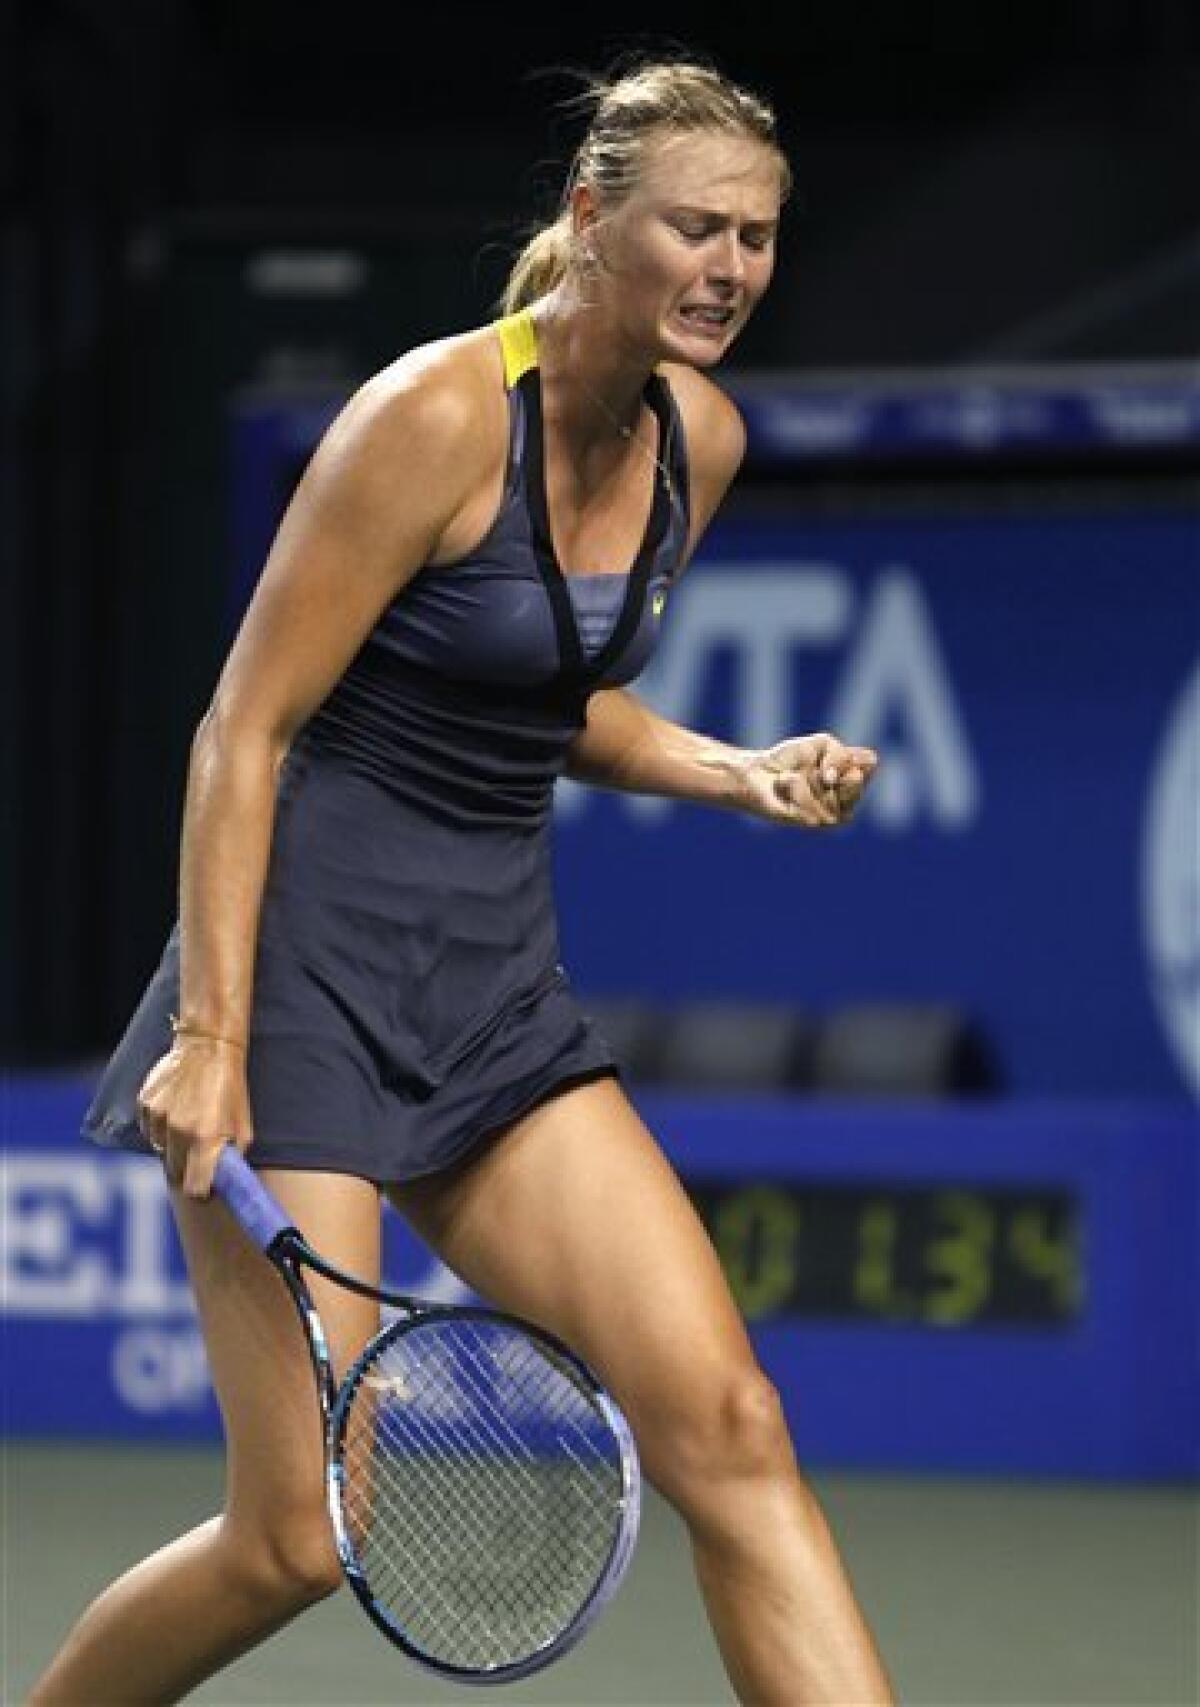 Maria Sharapova of Russia reacts to winning a point against Tamarine Tanasugarn of Thailand during their second round match of the Japan Pan Pacific Open tennis tournament in Tokyo, Monday, Sept. 26, 2011. Sharapova won the match, 6-2, 7-5. (AP Photo/Shizuo Kambayashi)